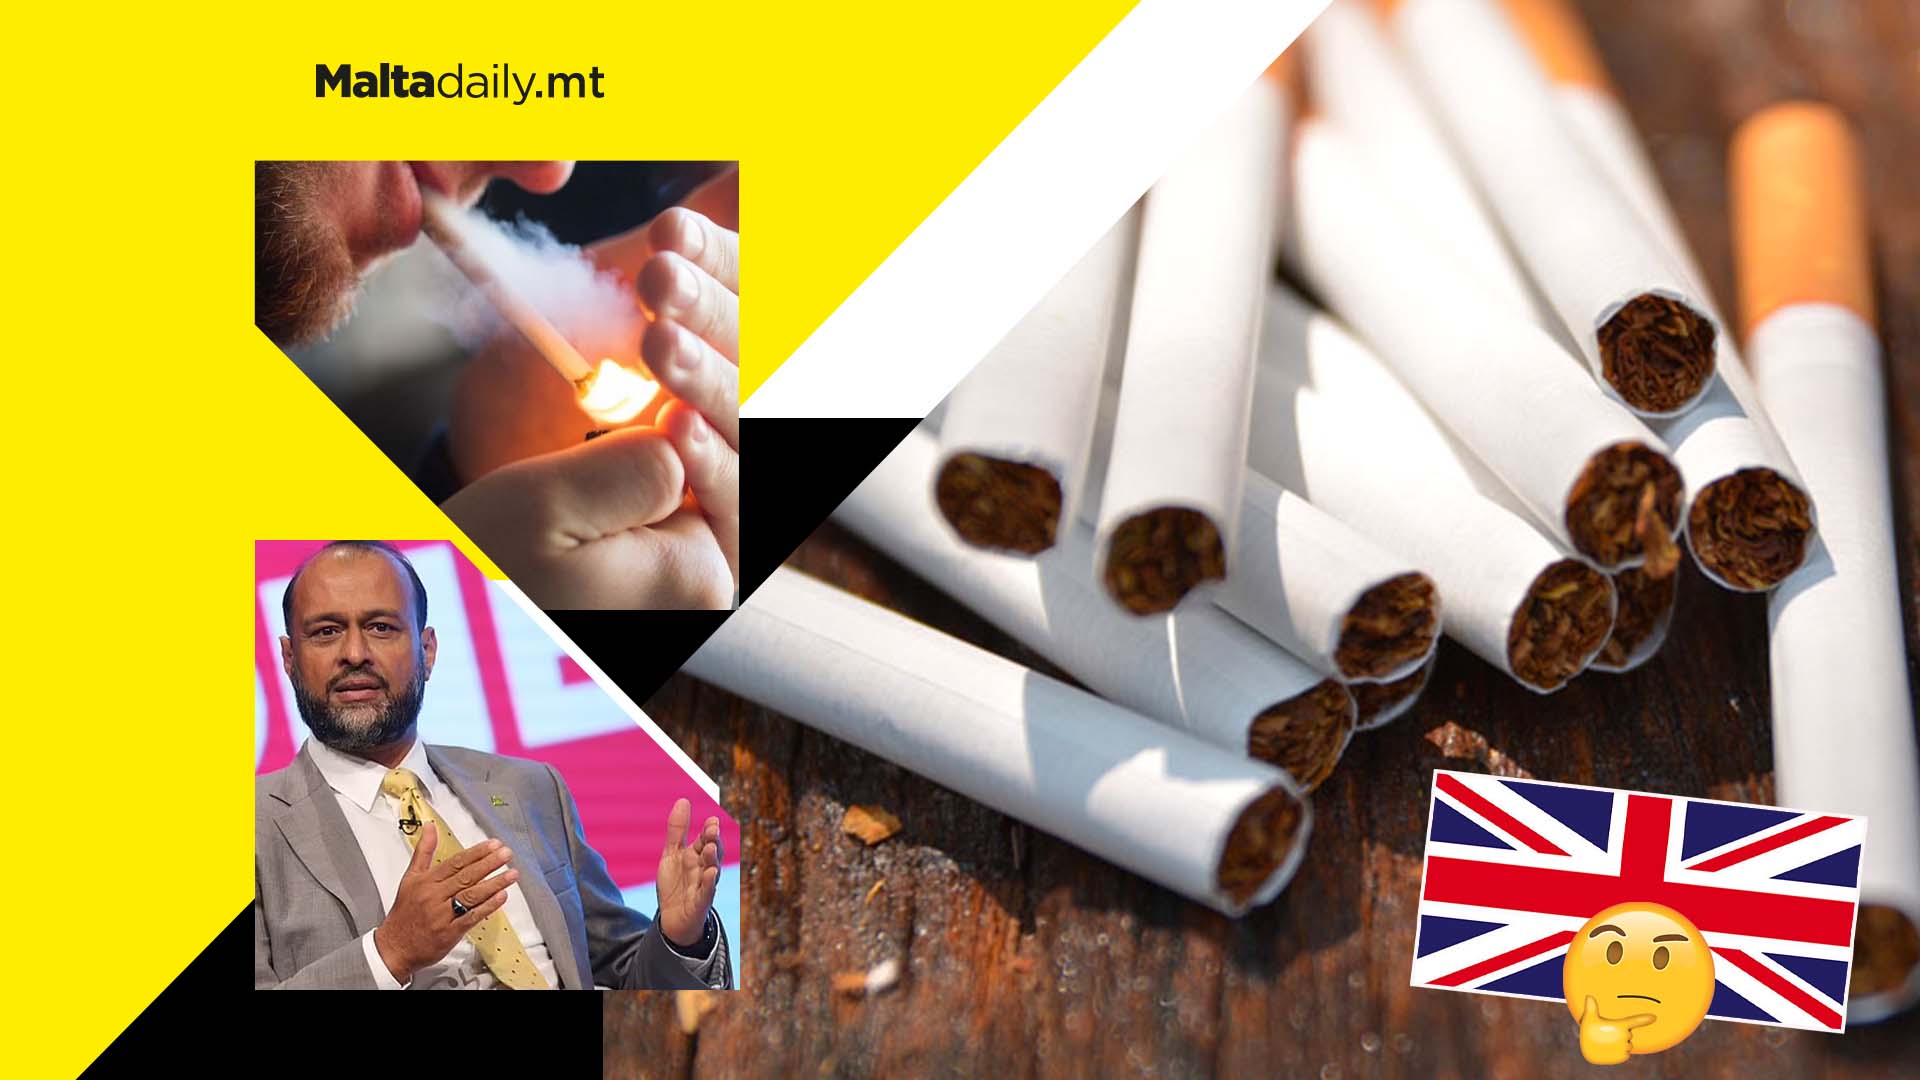 Under-25s could be banned from buying cigarettes in UK